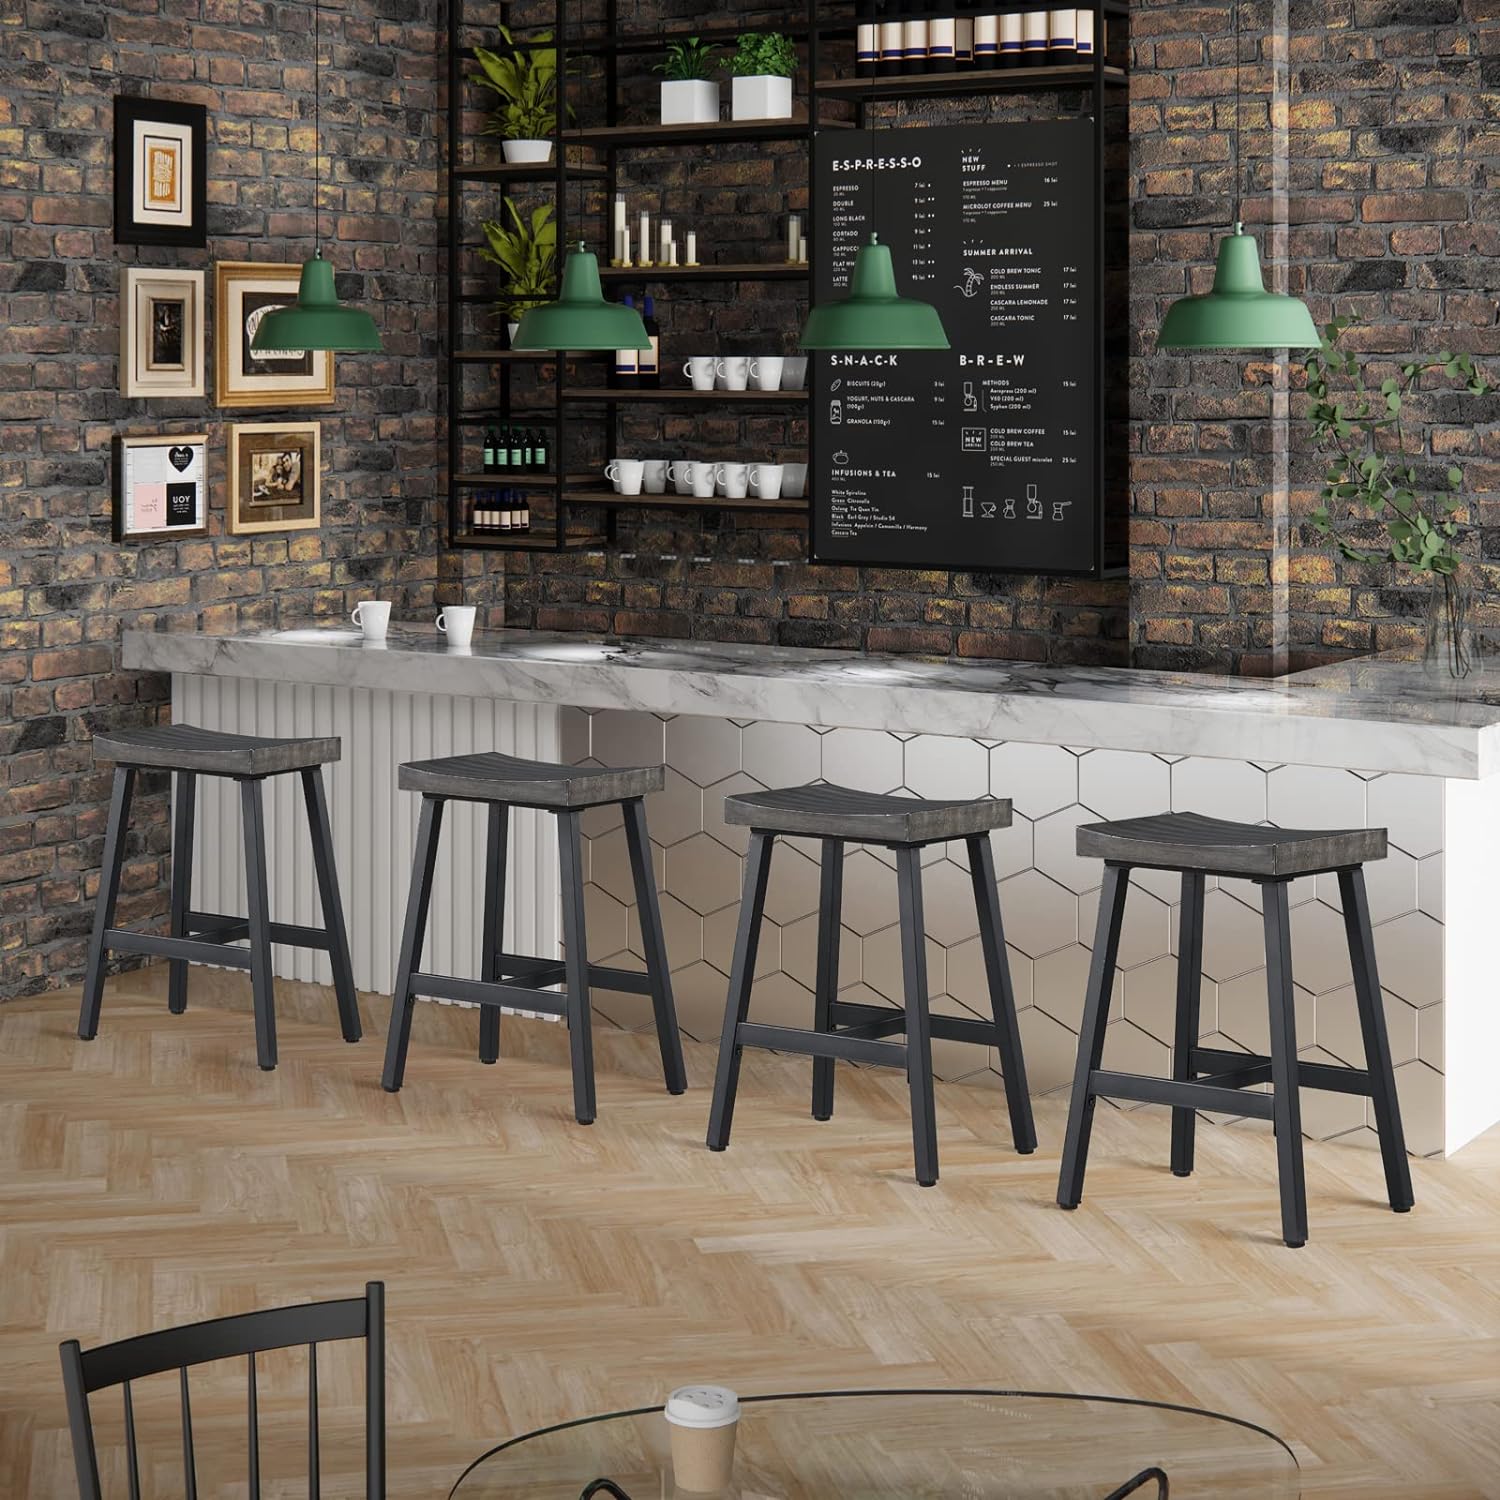 Rustic Industrial Wood Bar Stools （Set of 2）EXTRA 55%OFF AT CHECKOUT